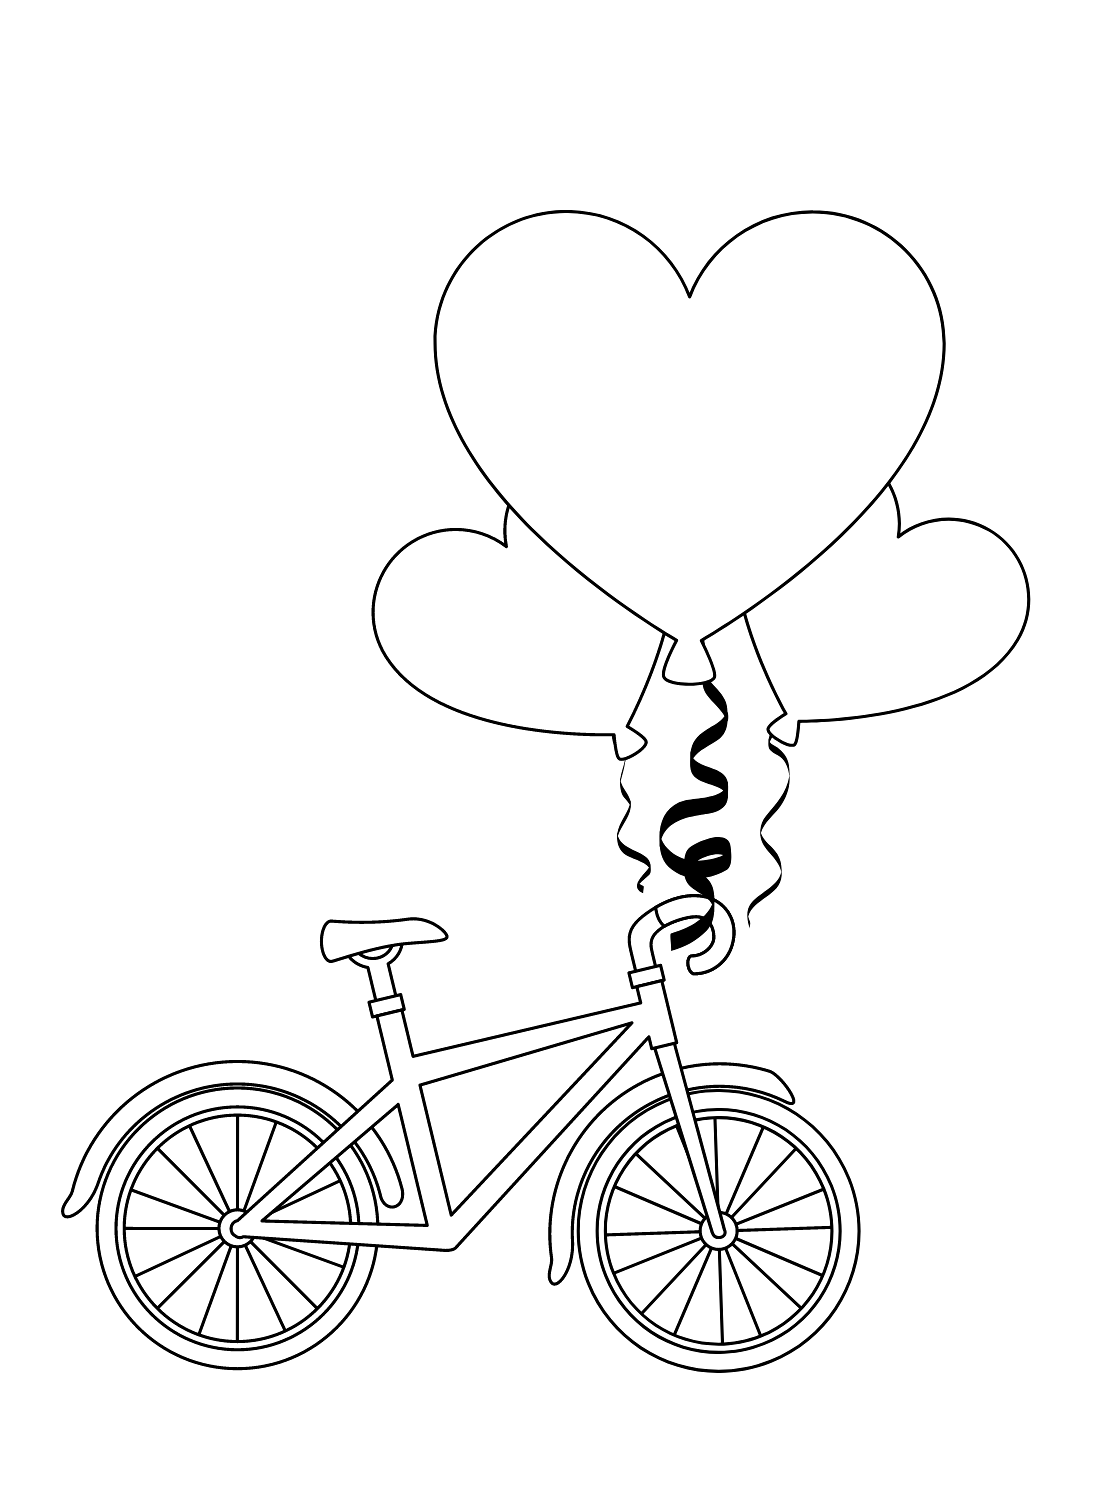 Bicycle with Love Heart Balloons from Bicycle